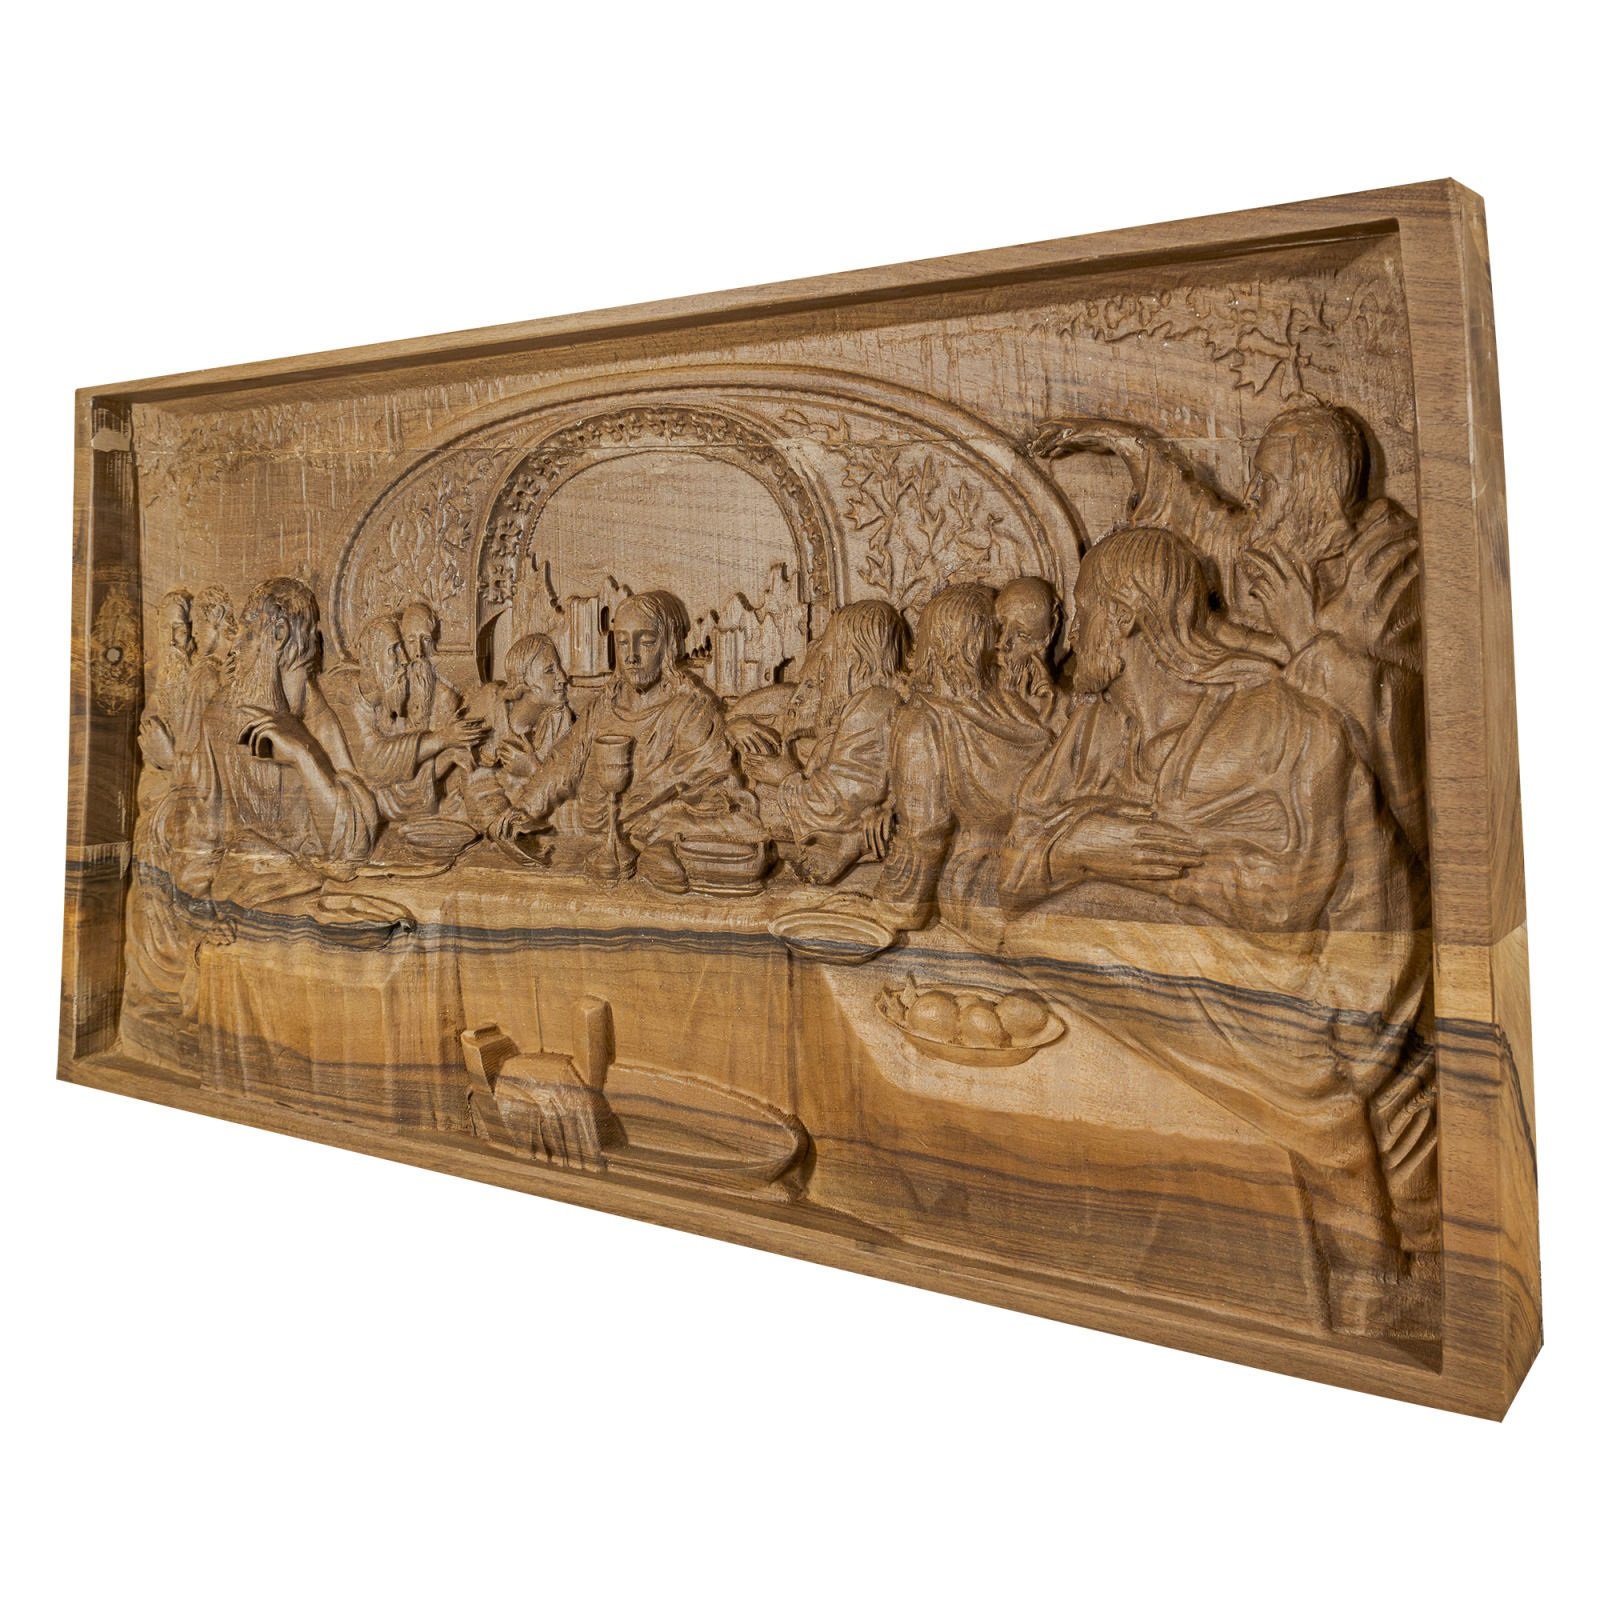 Handmade Wood Carving tableau sham akhar design code C6,Handmade Wood Carving tableau,Woodcarvings prices,price of Woodcarving dish